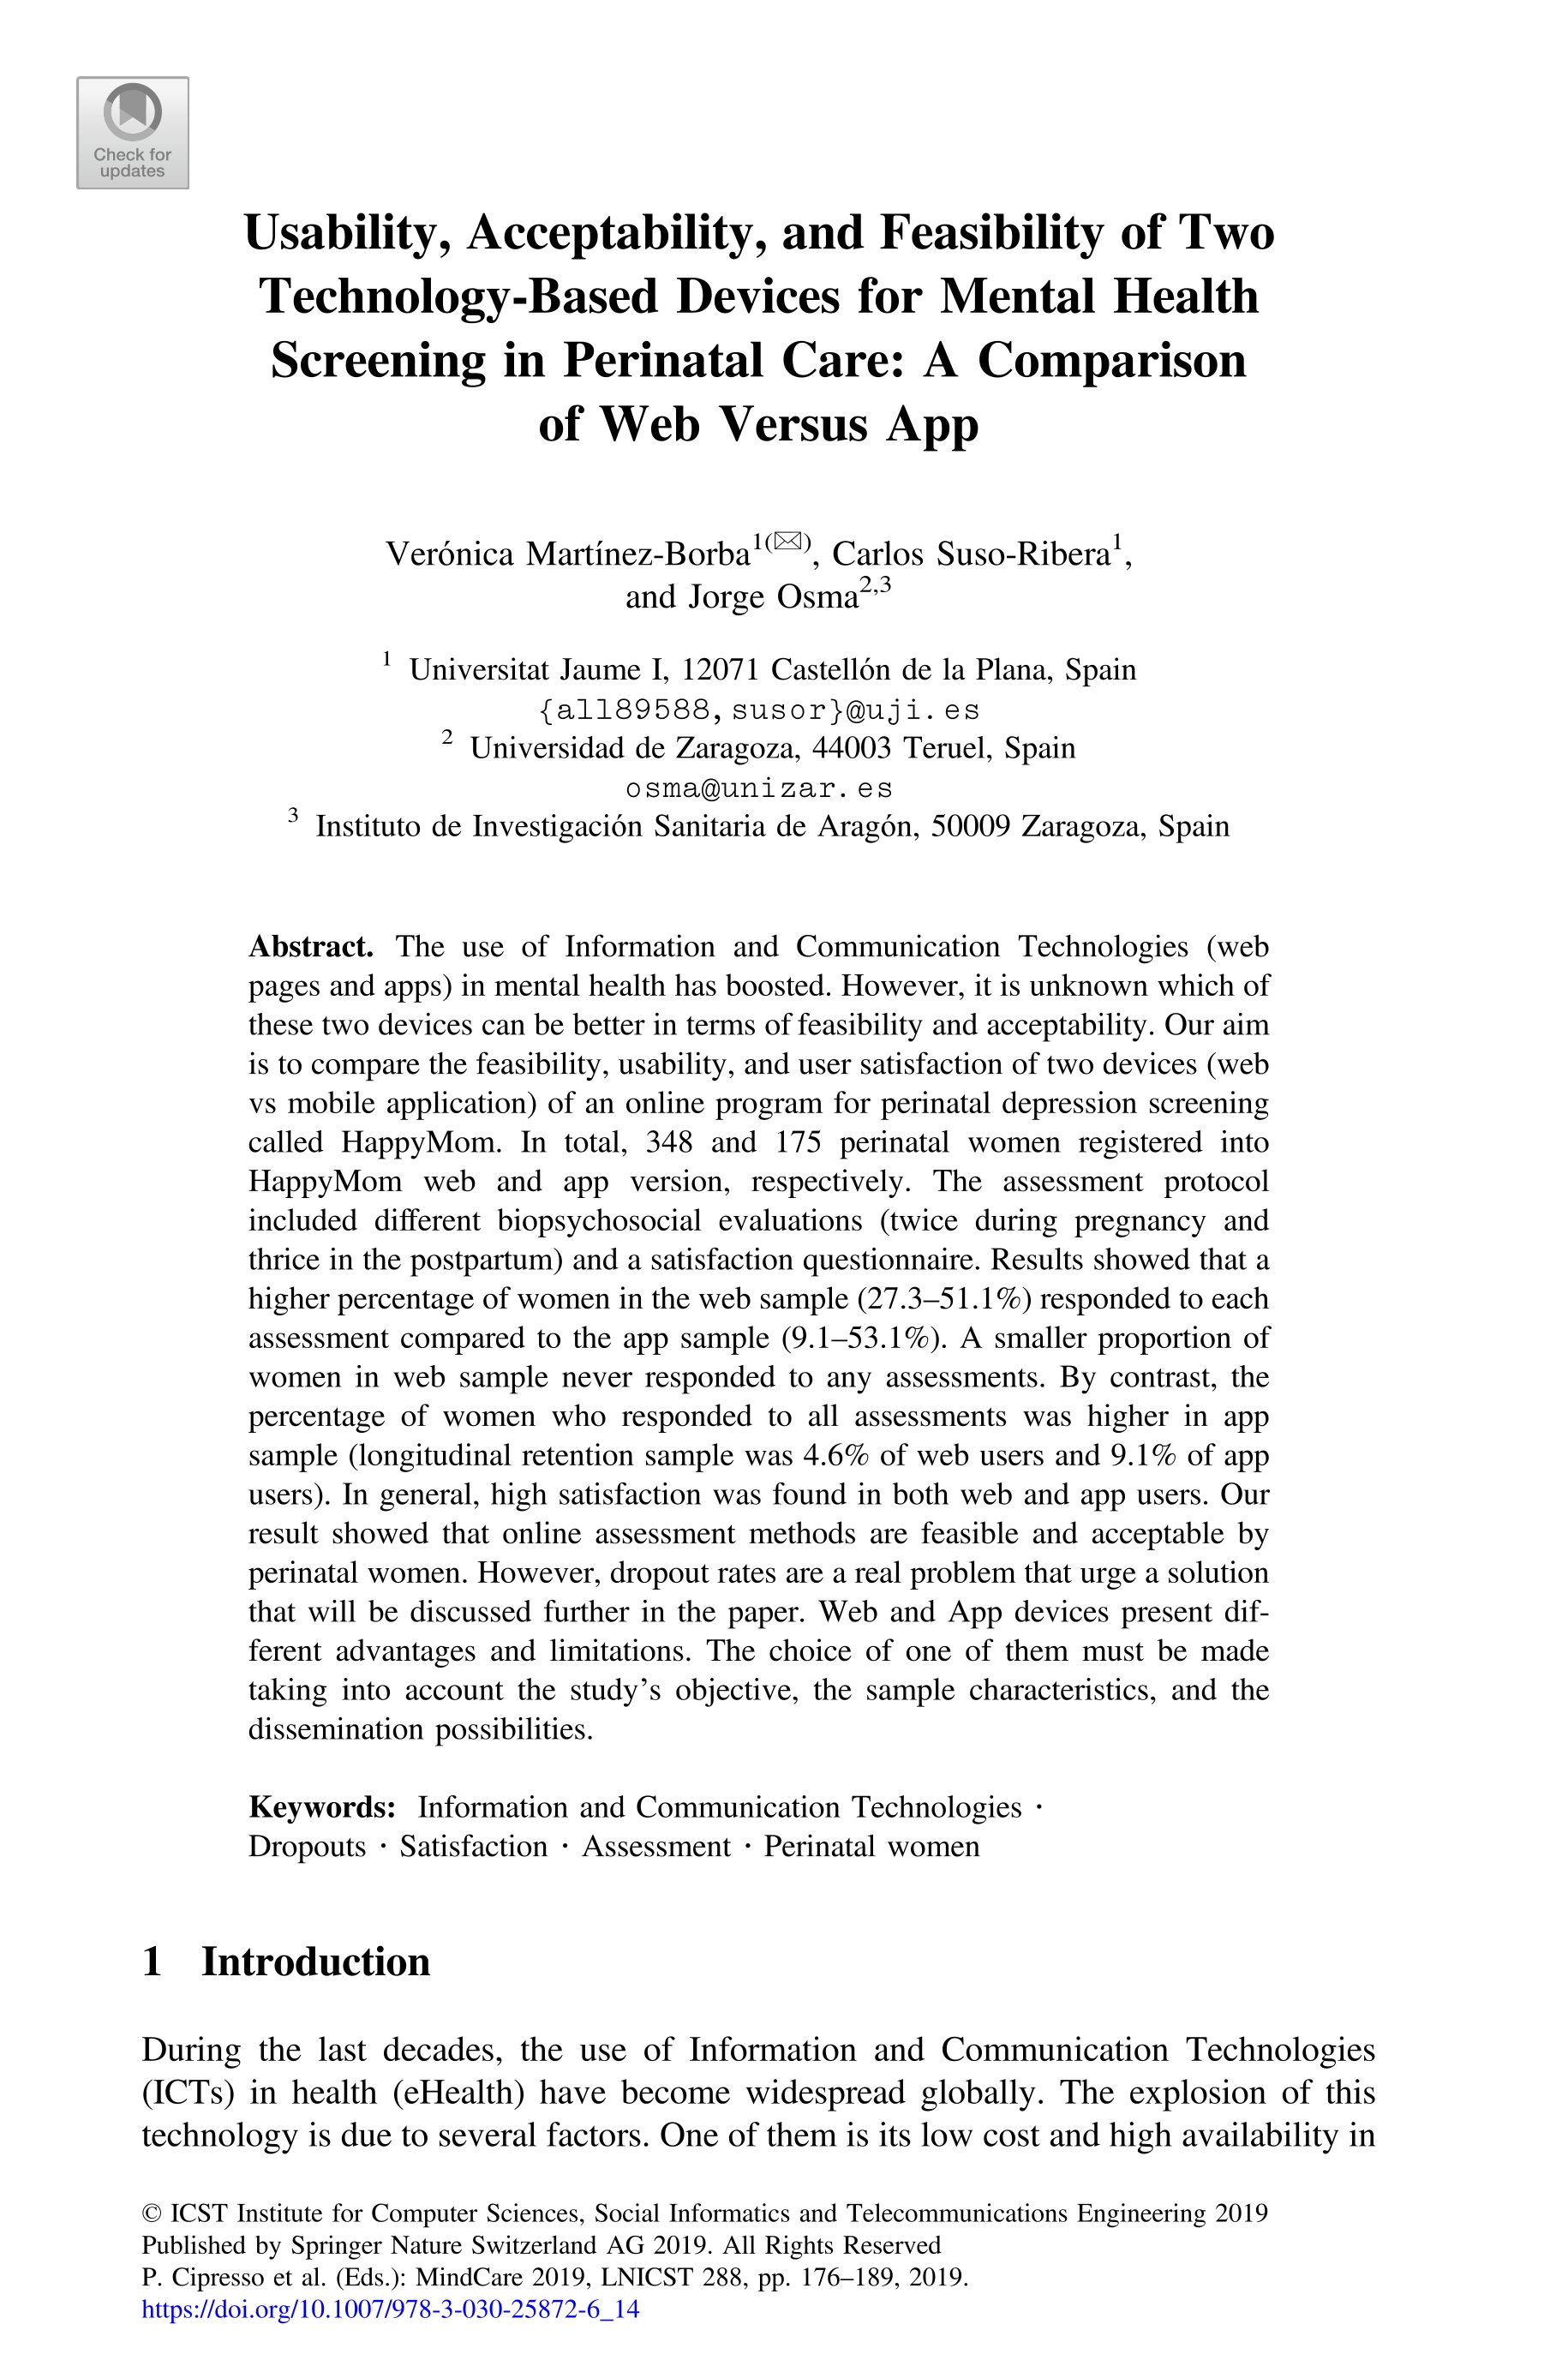 Usability, acceptability, and feasibility of two technology-based devices for mental health screening in perinatal care: A comparison of web versus app